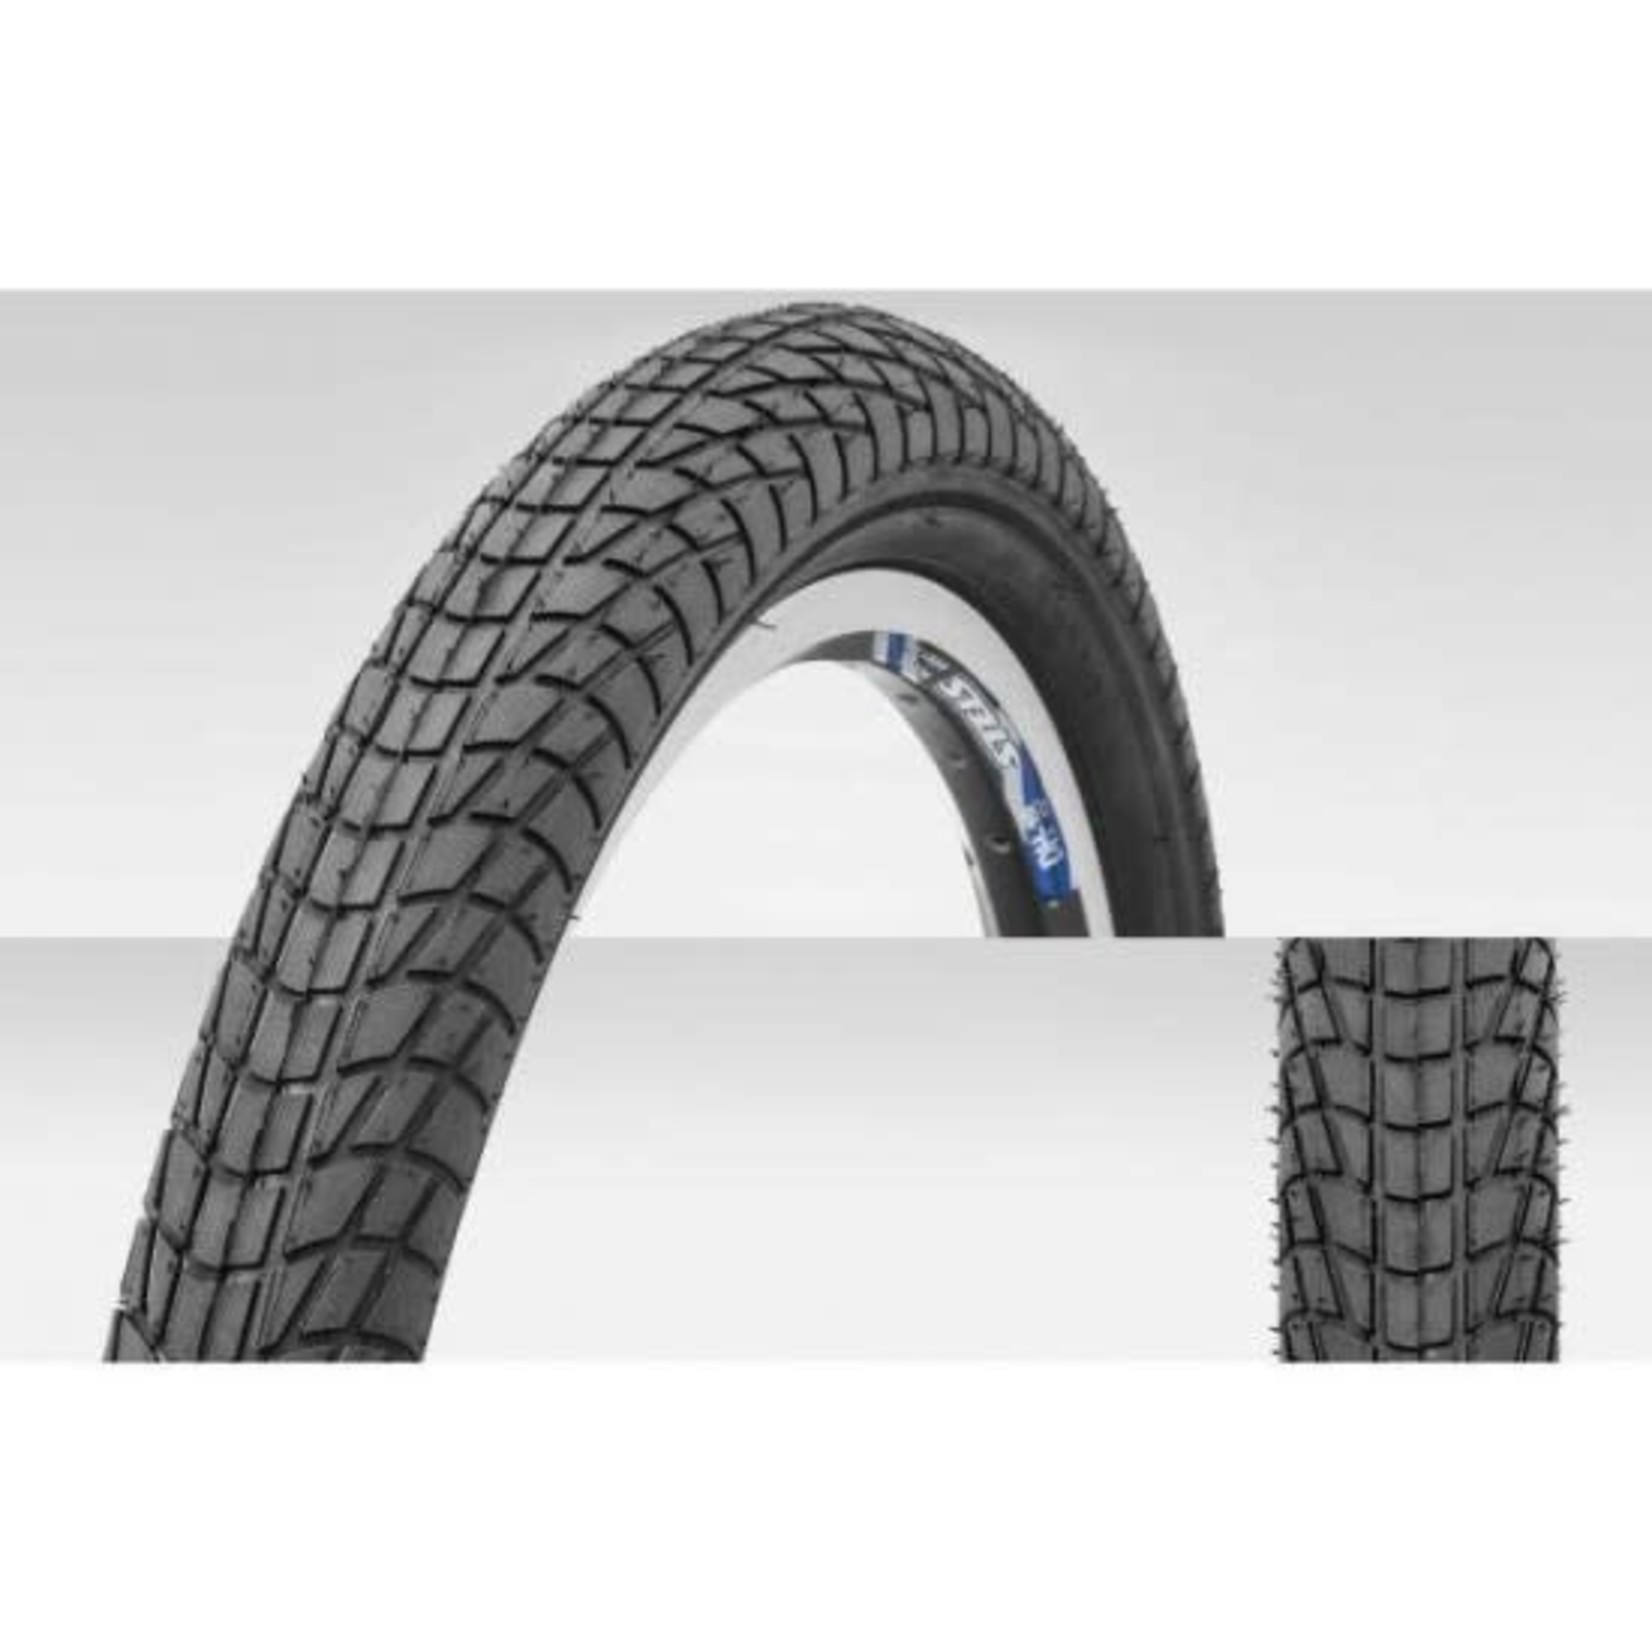 TYRE 20X2.125 SMOOTH